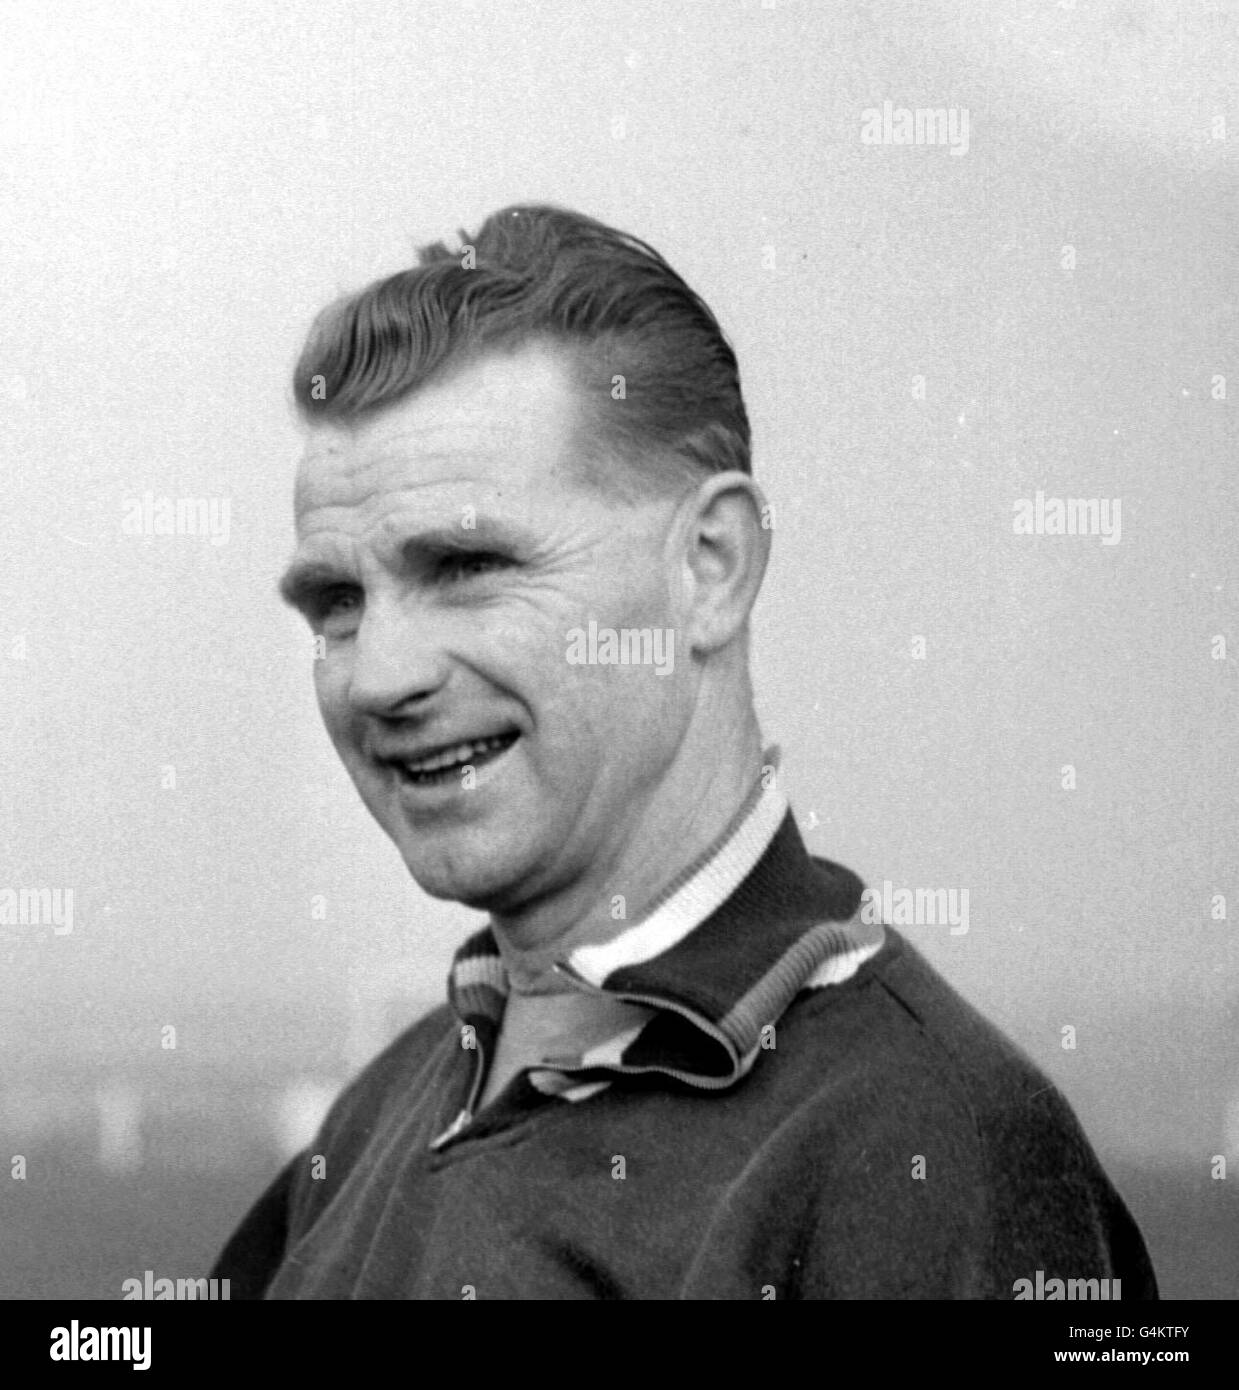 Peter Doherty of Bristol City, and later Northern Ireland team manager. Mr Doherty won fame with Blackpool, Manchester City, Derby County & Huddersfield. * He arrived at Bristol City after resigning his post as manager of Doncaster Rovers in 1958. Stock Photo